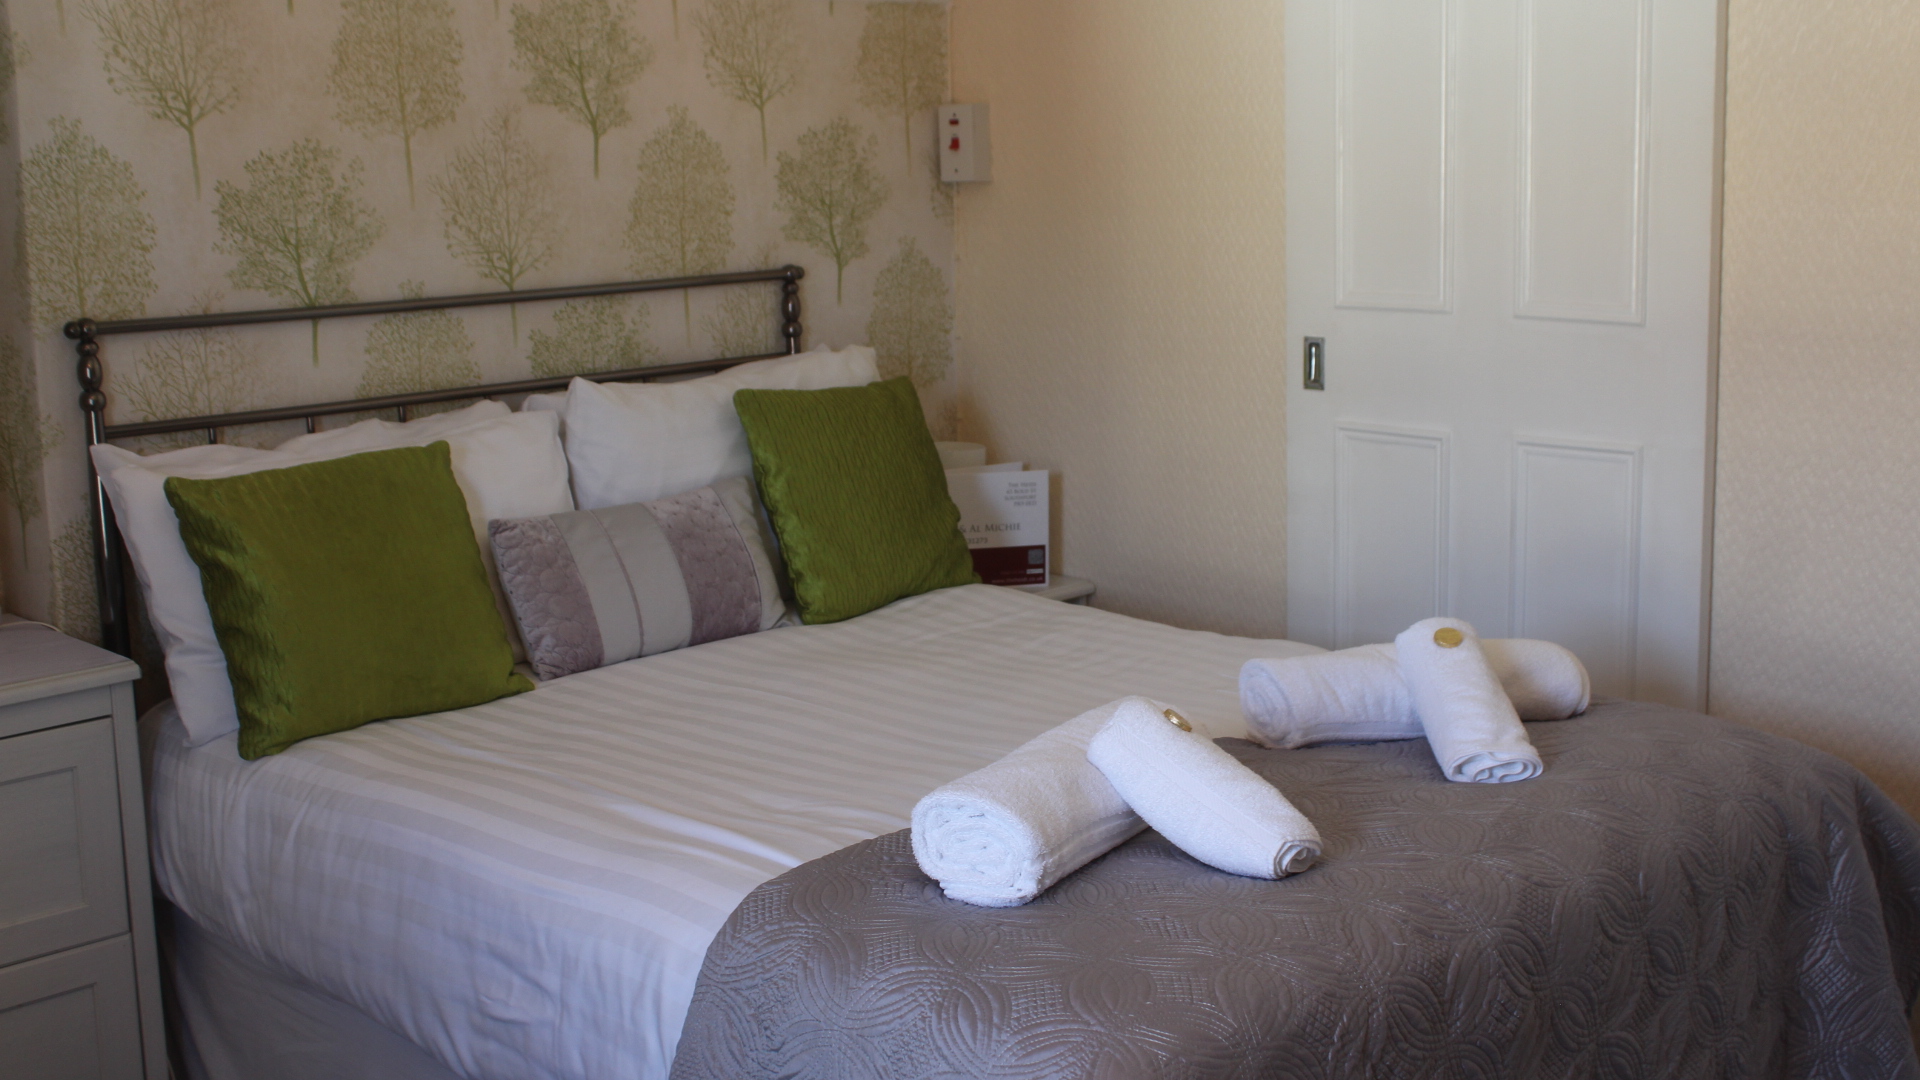 The Heidi Bed & Breakfast in Southport